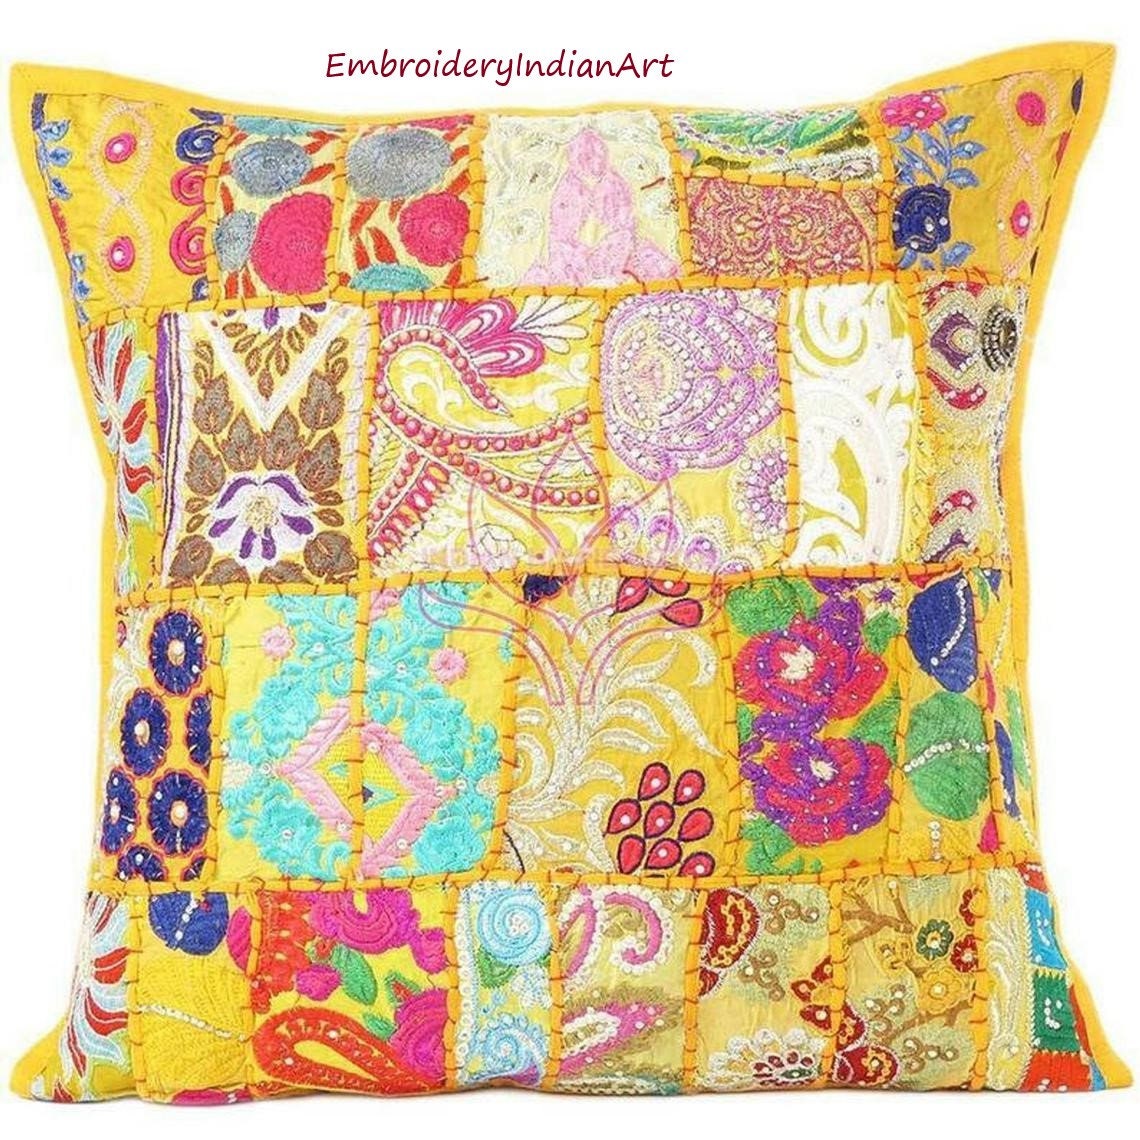 Embroidered Patchwork Cushion Covers Set of 4 - Etsy